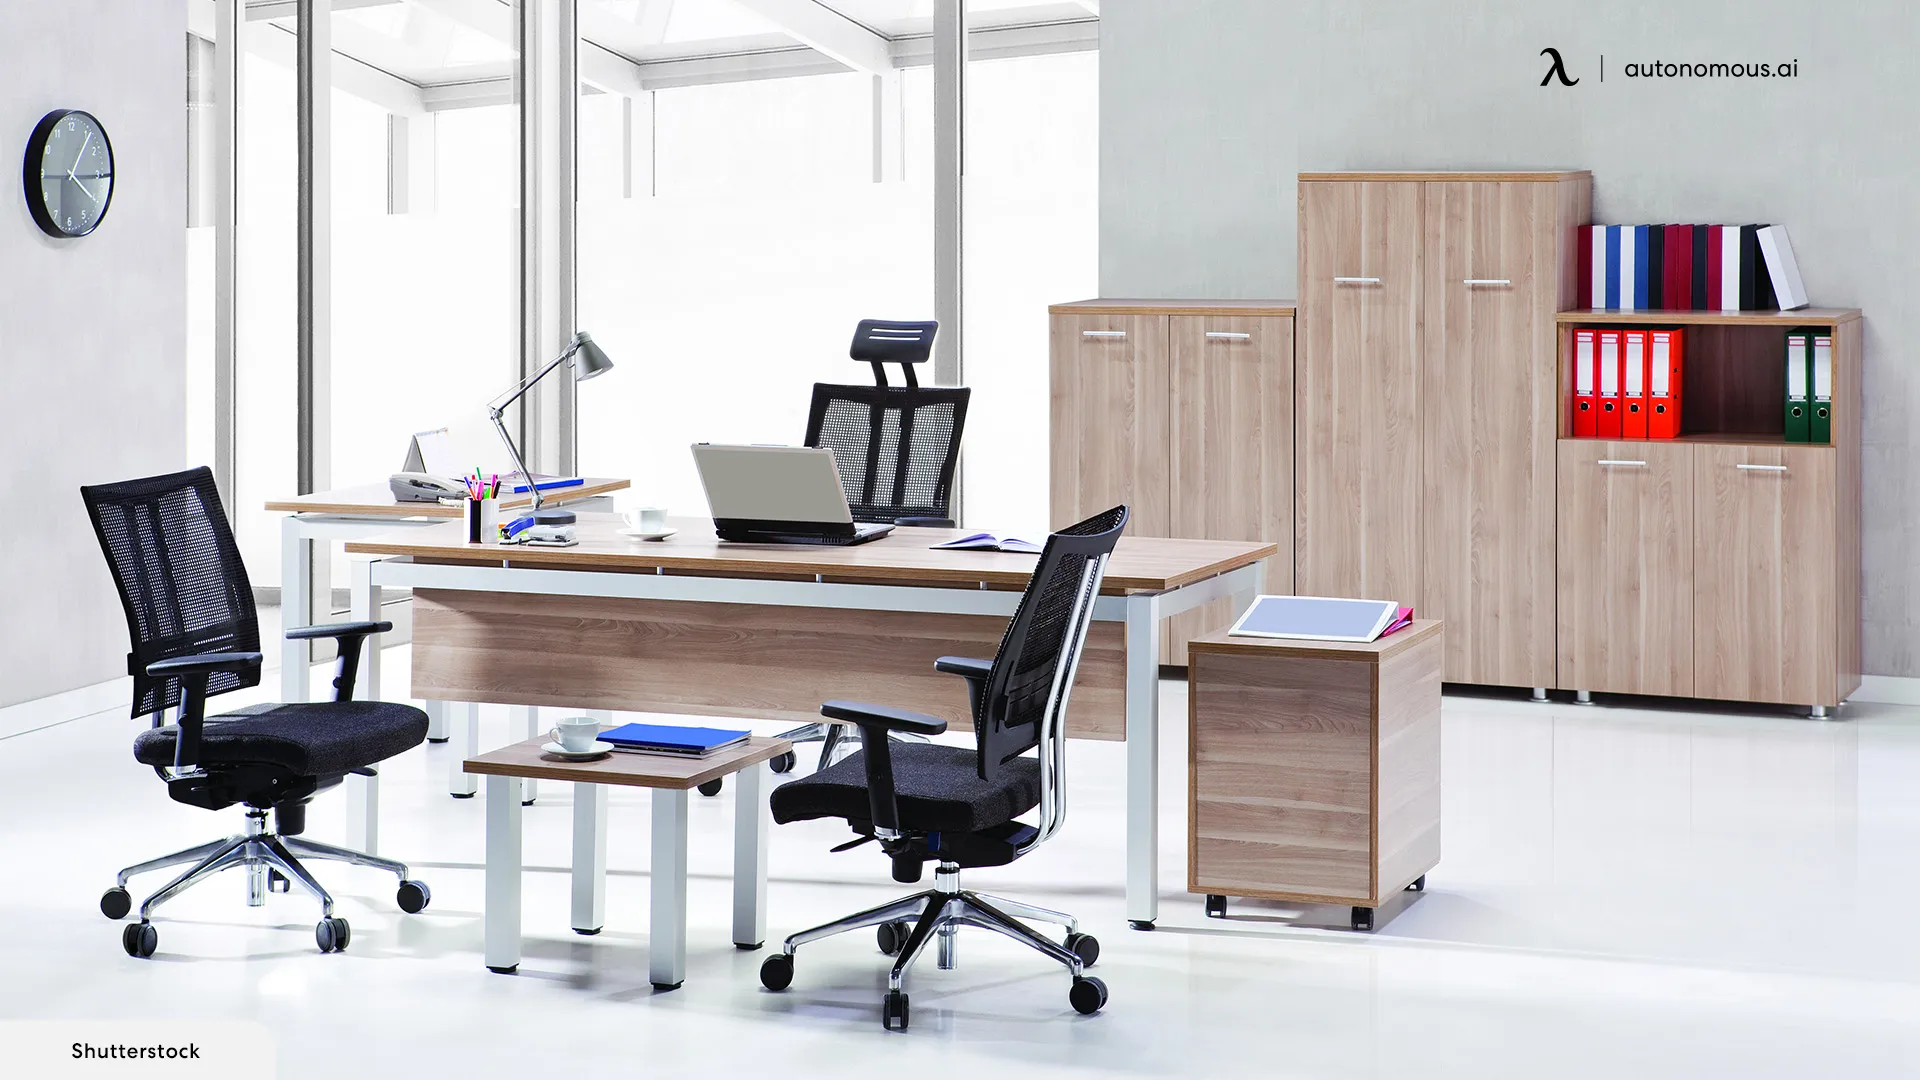 What About Office Furniture Stores?